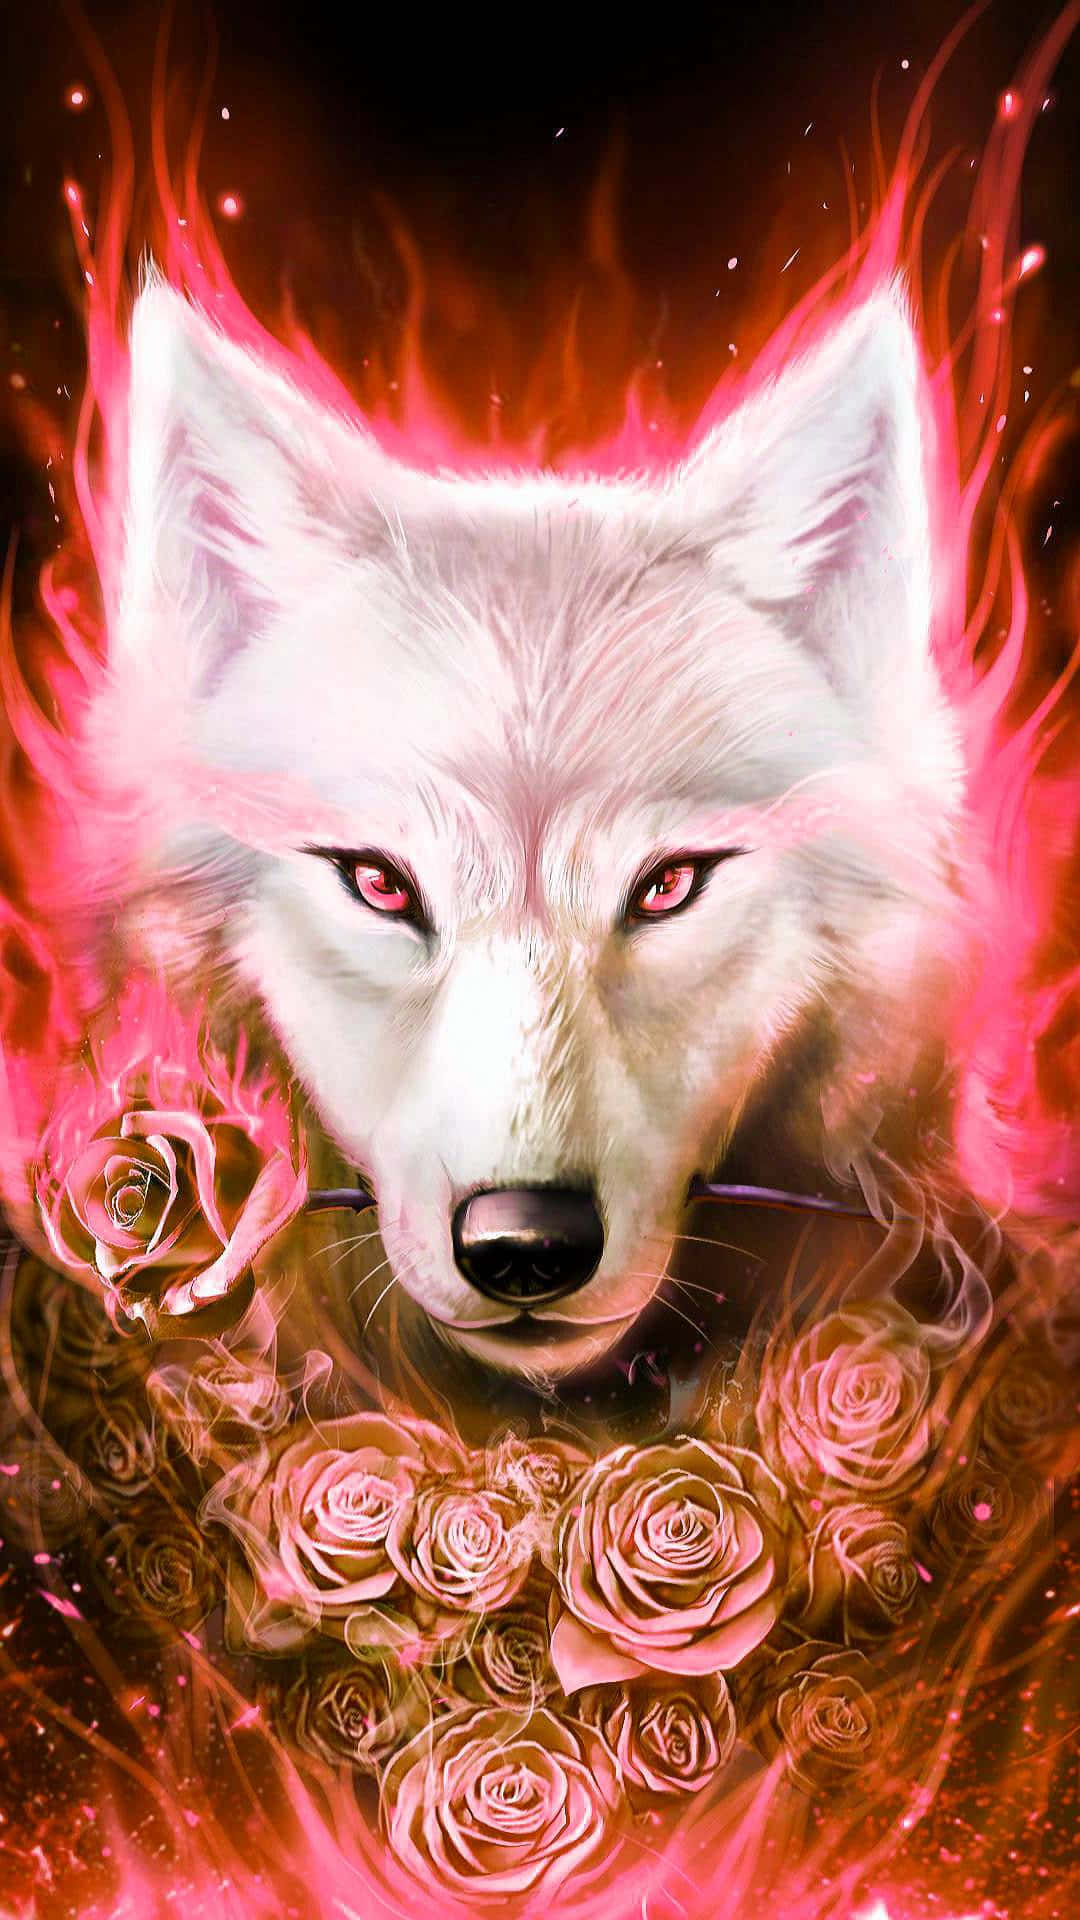 Free Fire And Ice Wolf Pictures , [100+] Fire And Ice Wolf Pictures for  FREE 